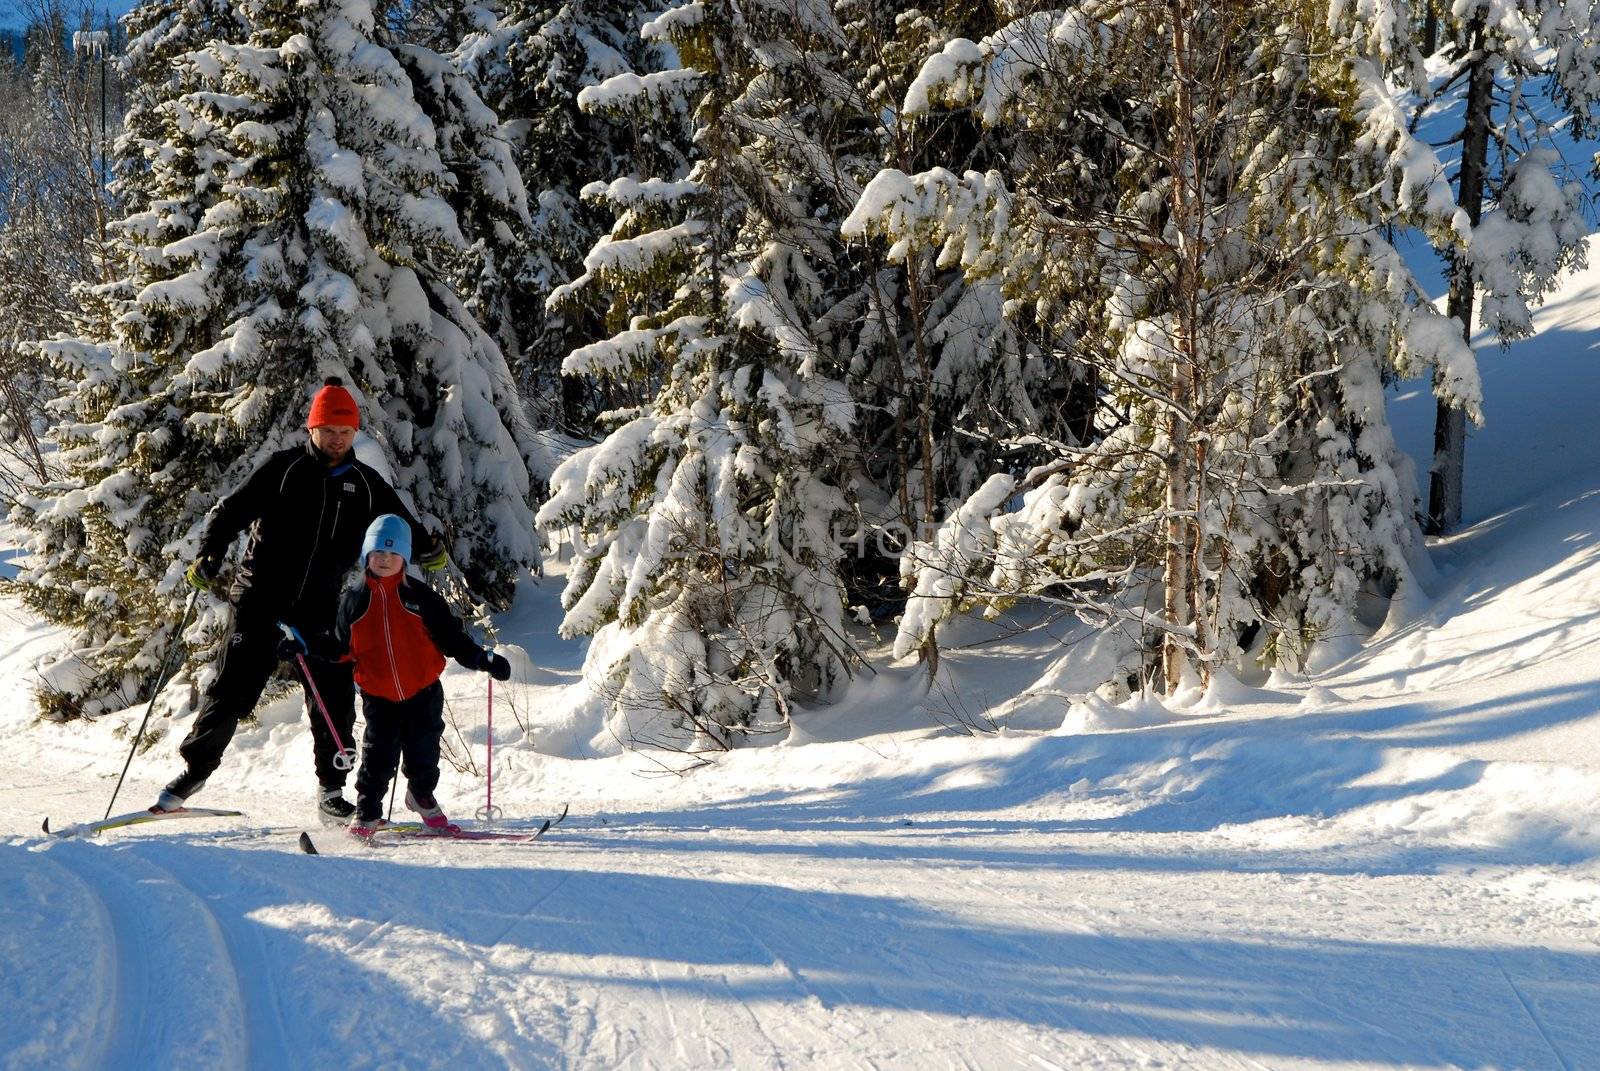 girl skiing with father. Please note: No negative use allowed.